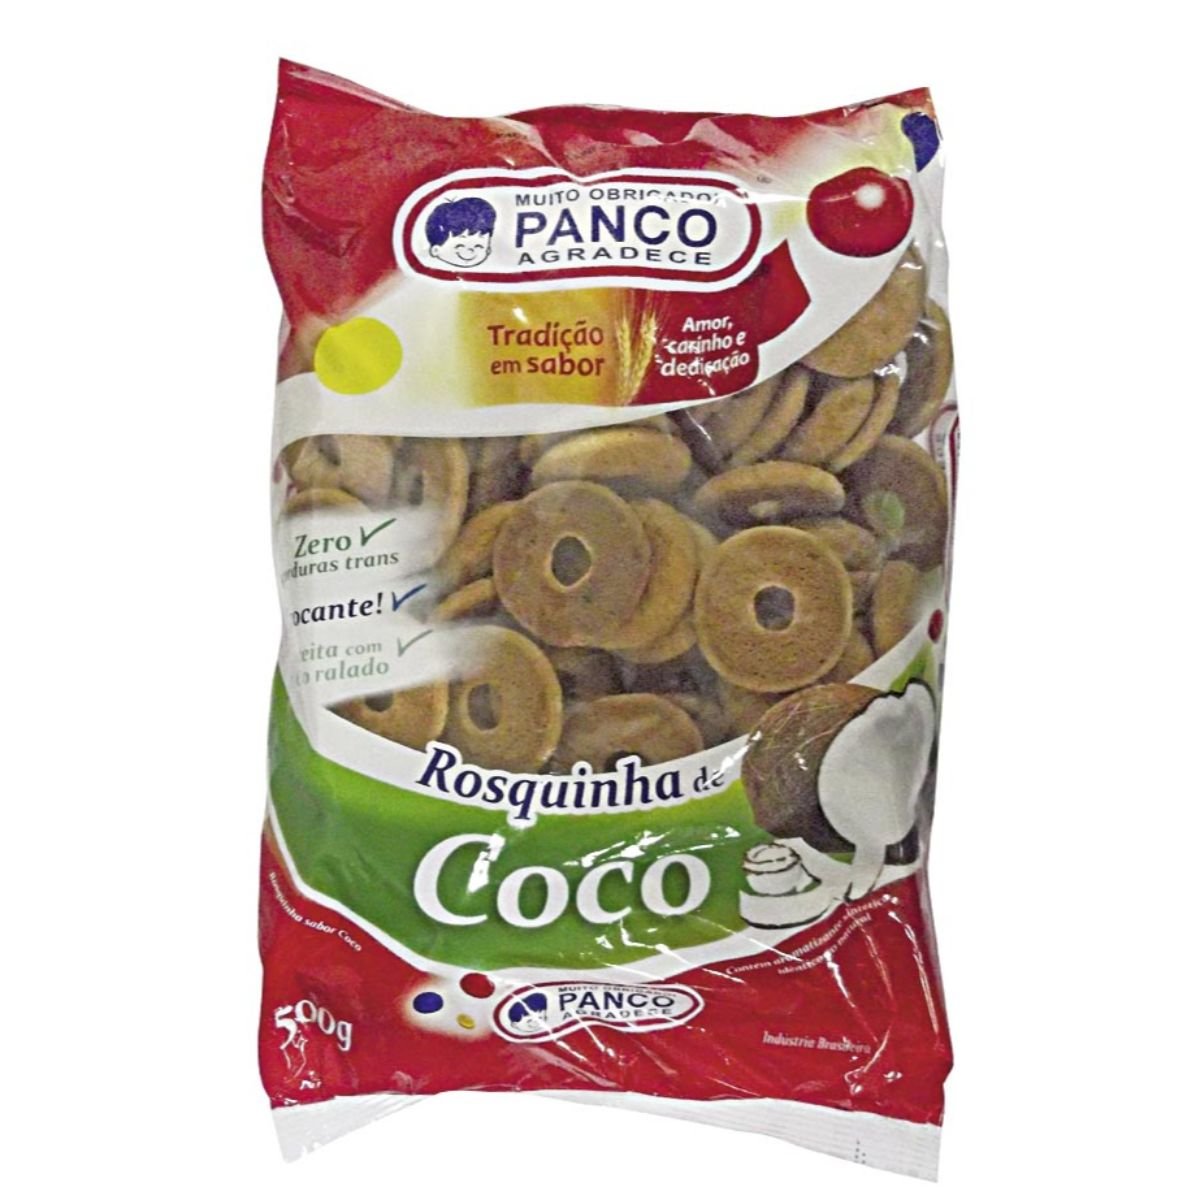 BISCOITO BAUDUCCO CHOCO BISCUIT AO LEITE PACOTE 36G - DELIVERY ALABARCE